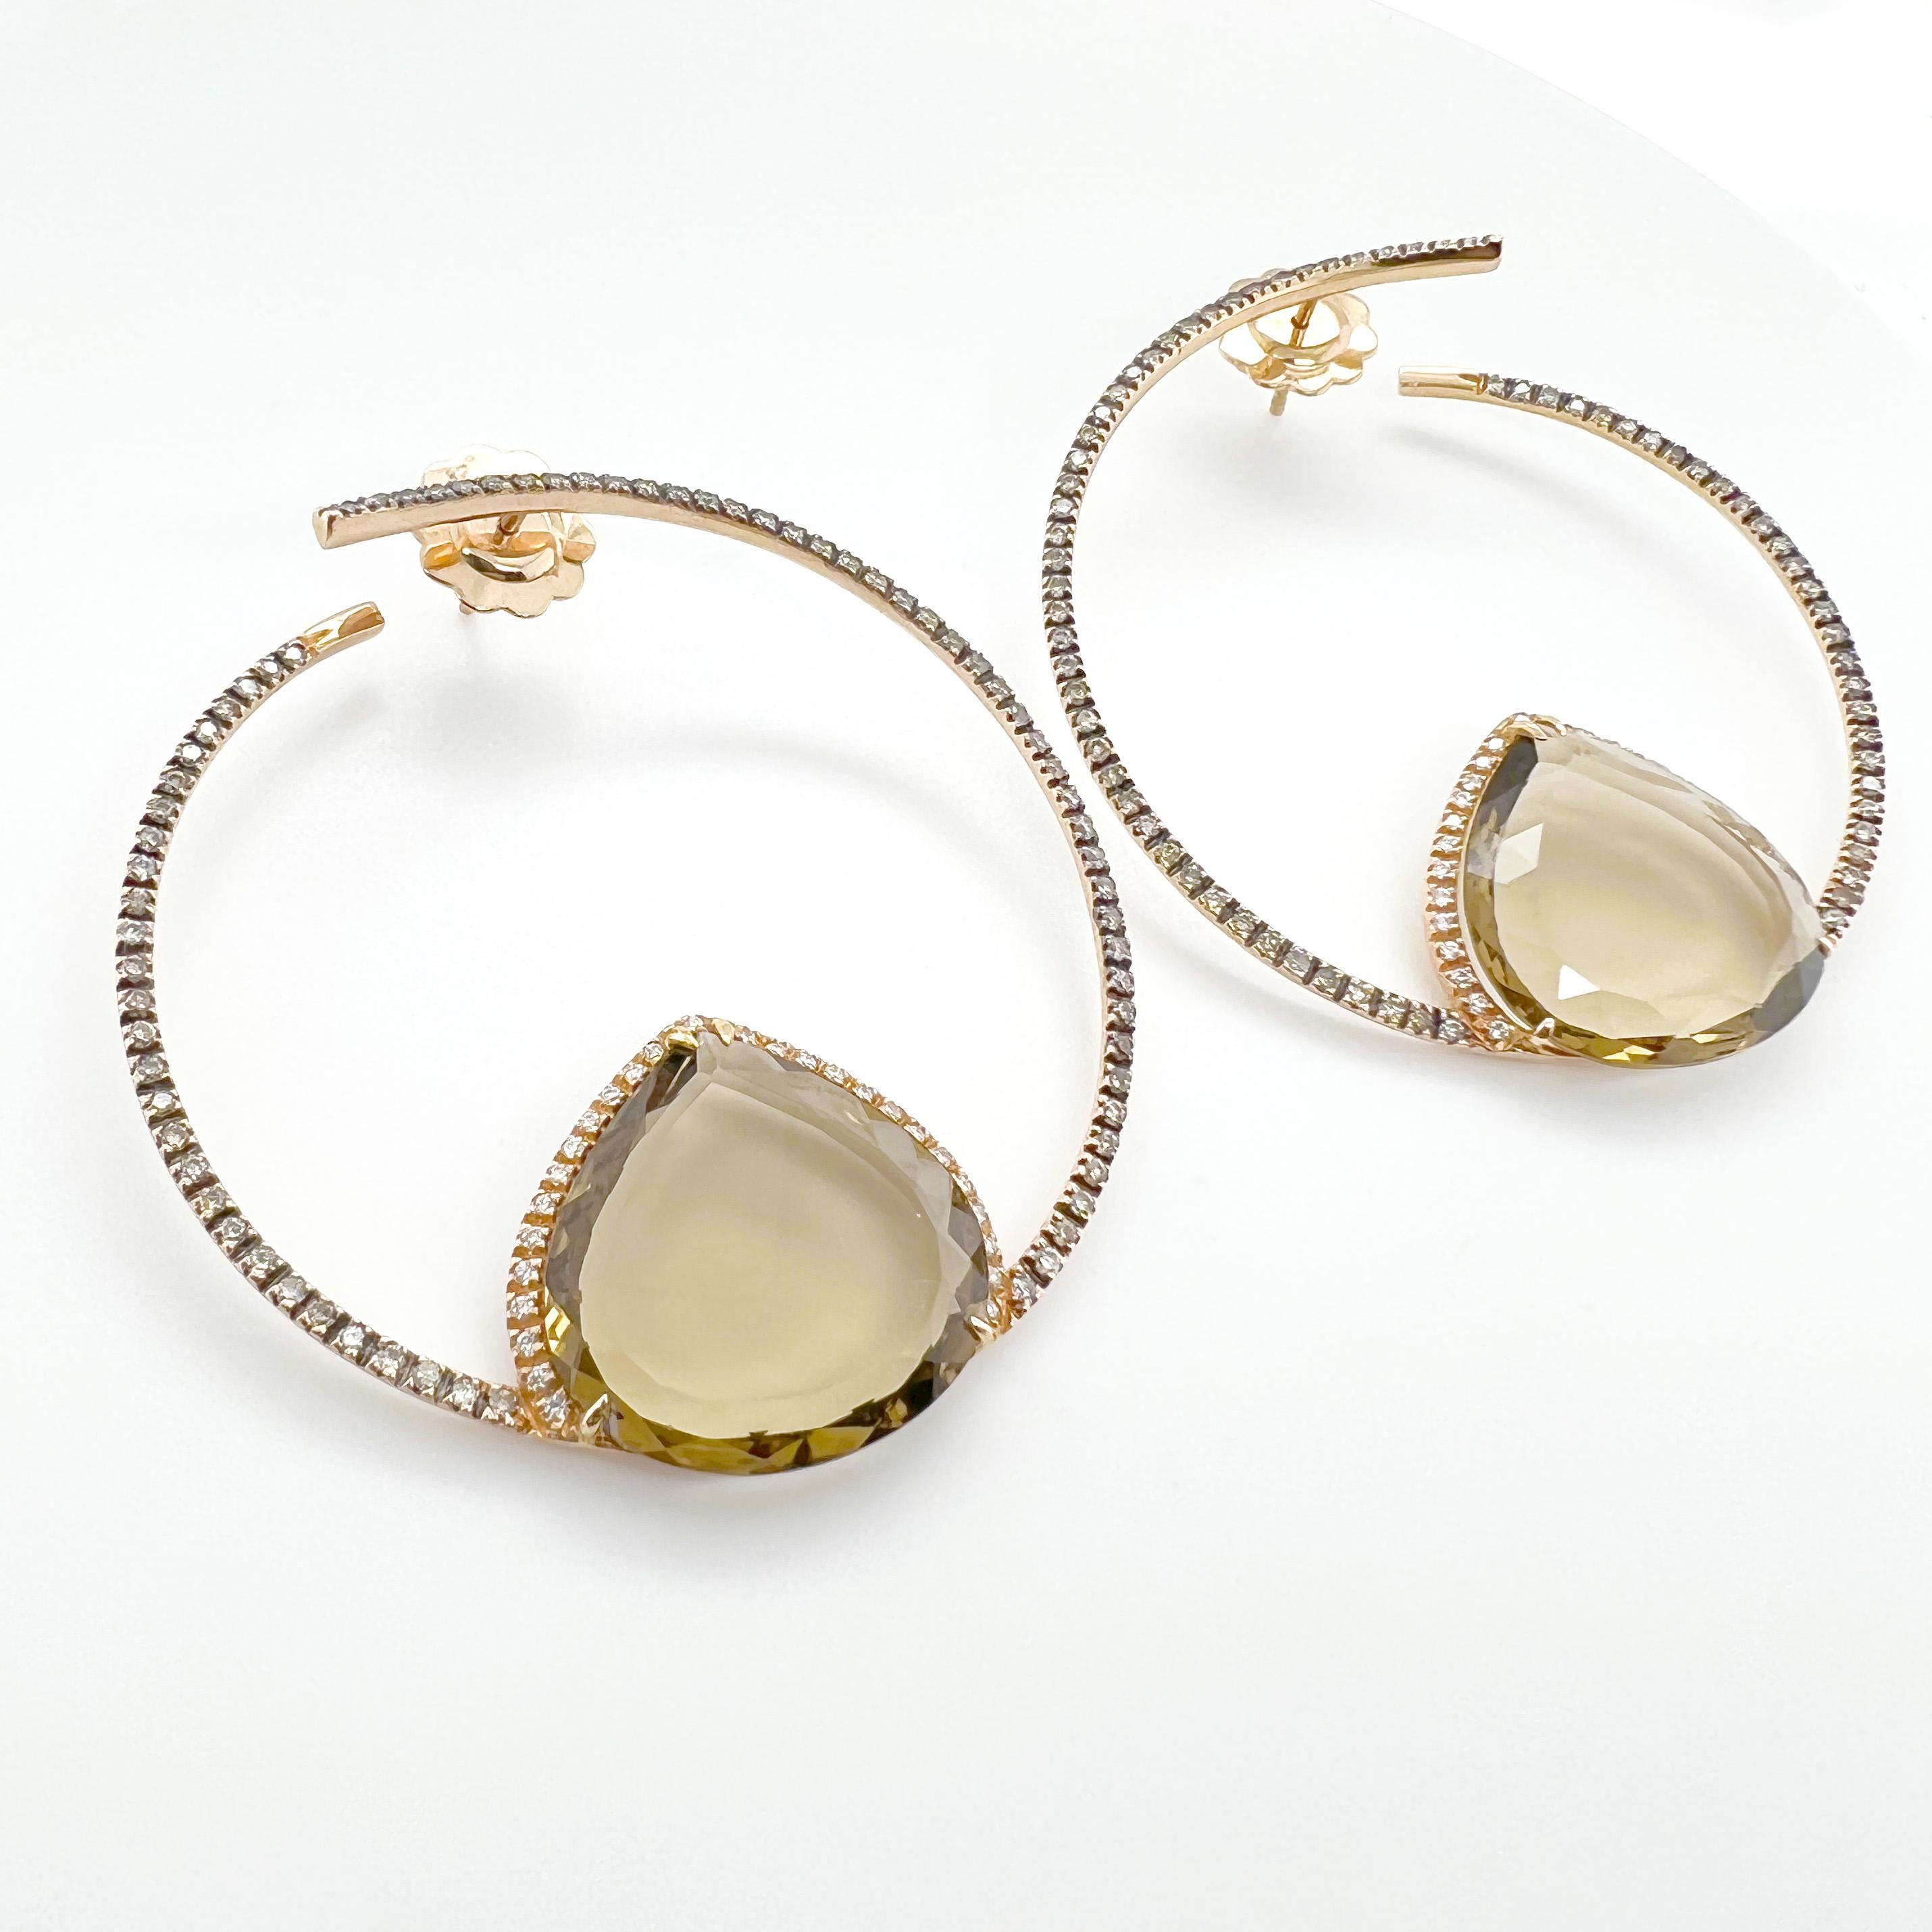 These frontal hoop earrings are a stunning design, crafted with 18kt pink gold and featuring brown and white natural diamonds and smoky quartz. The hoop design creates a dynamic and wearable accessory that adds a touch of sophistication and elegance